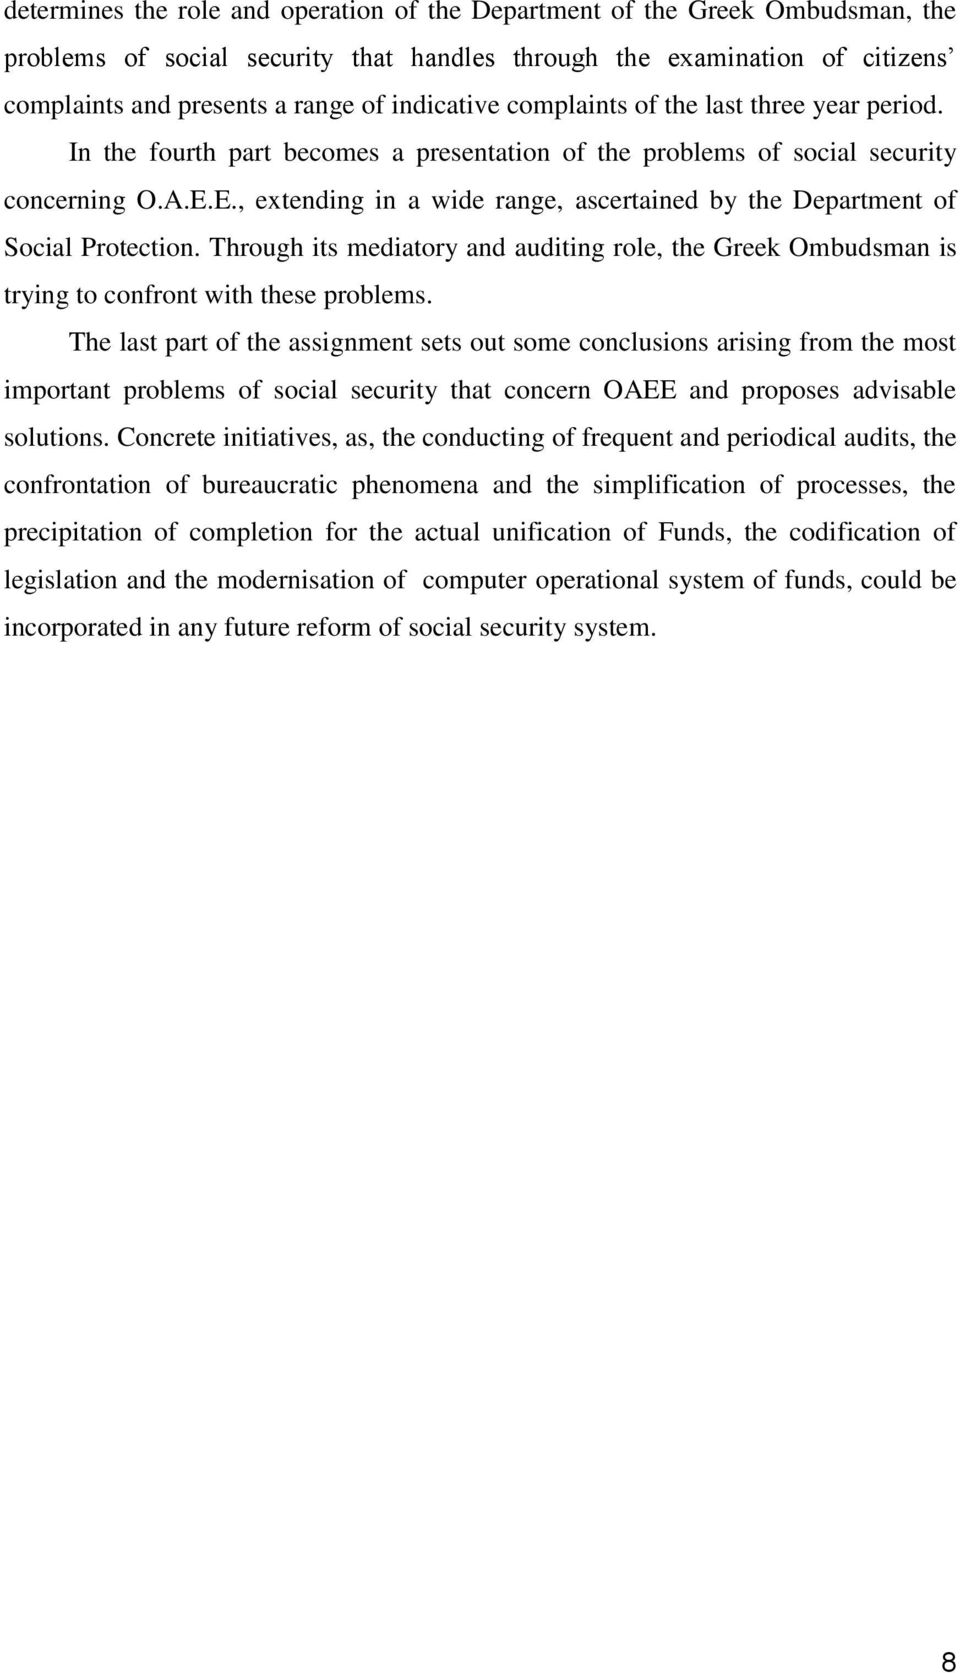 E., extending in a wide range, ascertained by the Department of Social Protection. Through its mediatory and auditing role, the Greek Ombudsman is trying to confront with these problems.